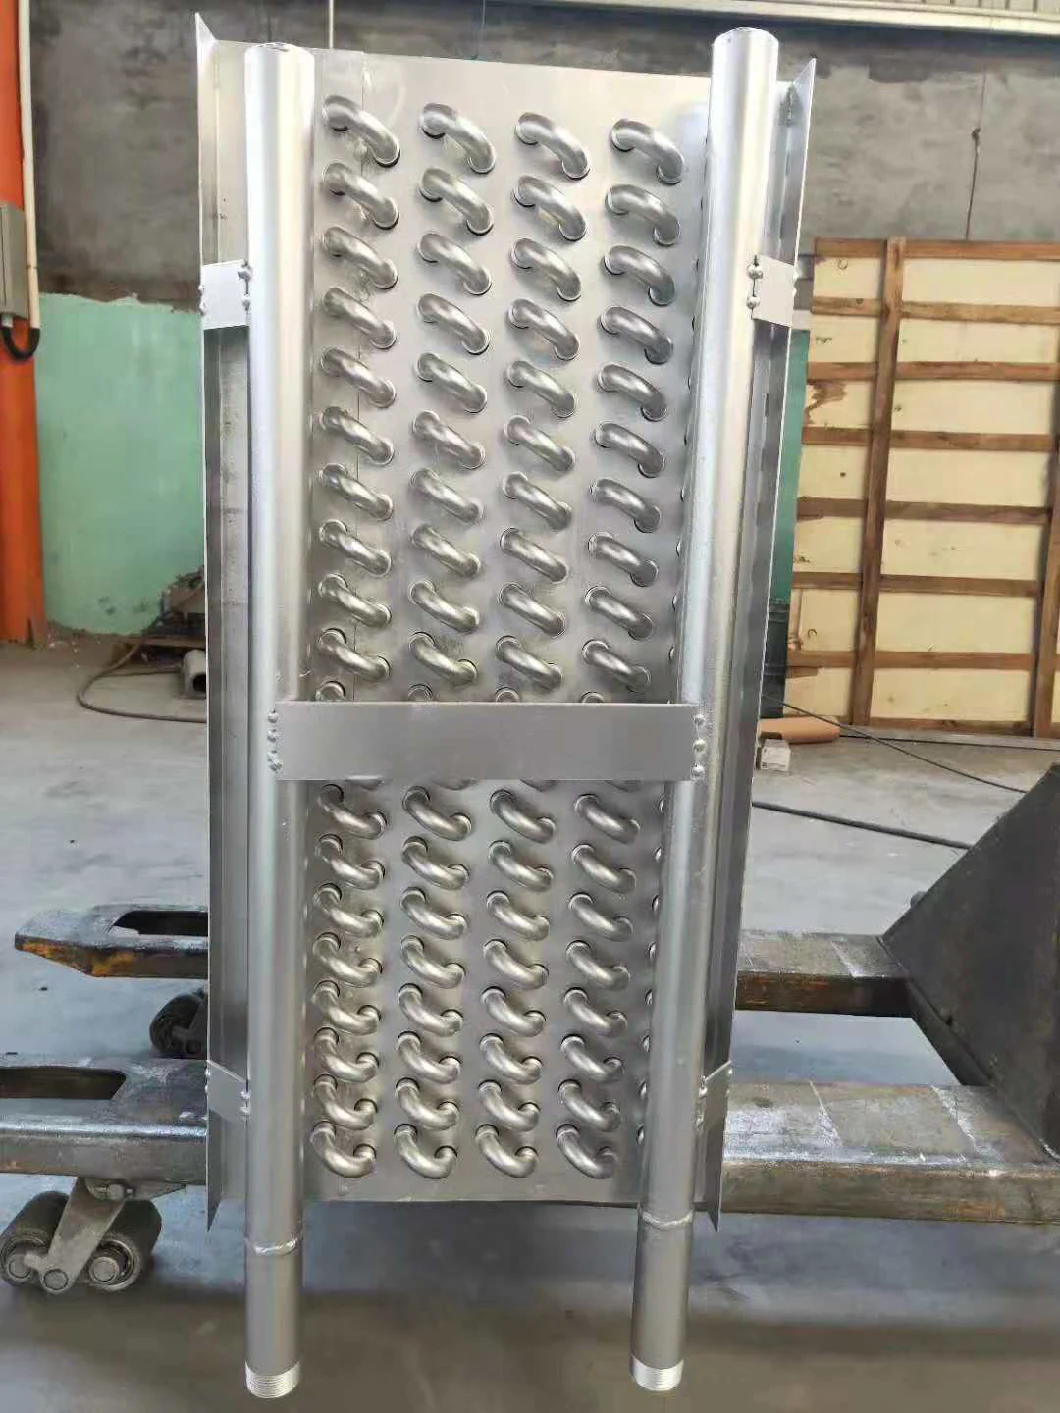 Factory Outlet Air Handling Unit / Ceiling Mounted Air Handling Unit